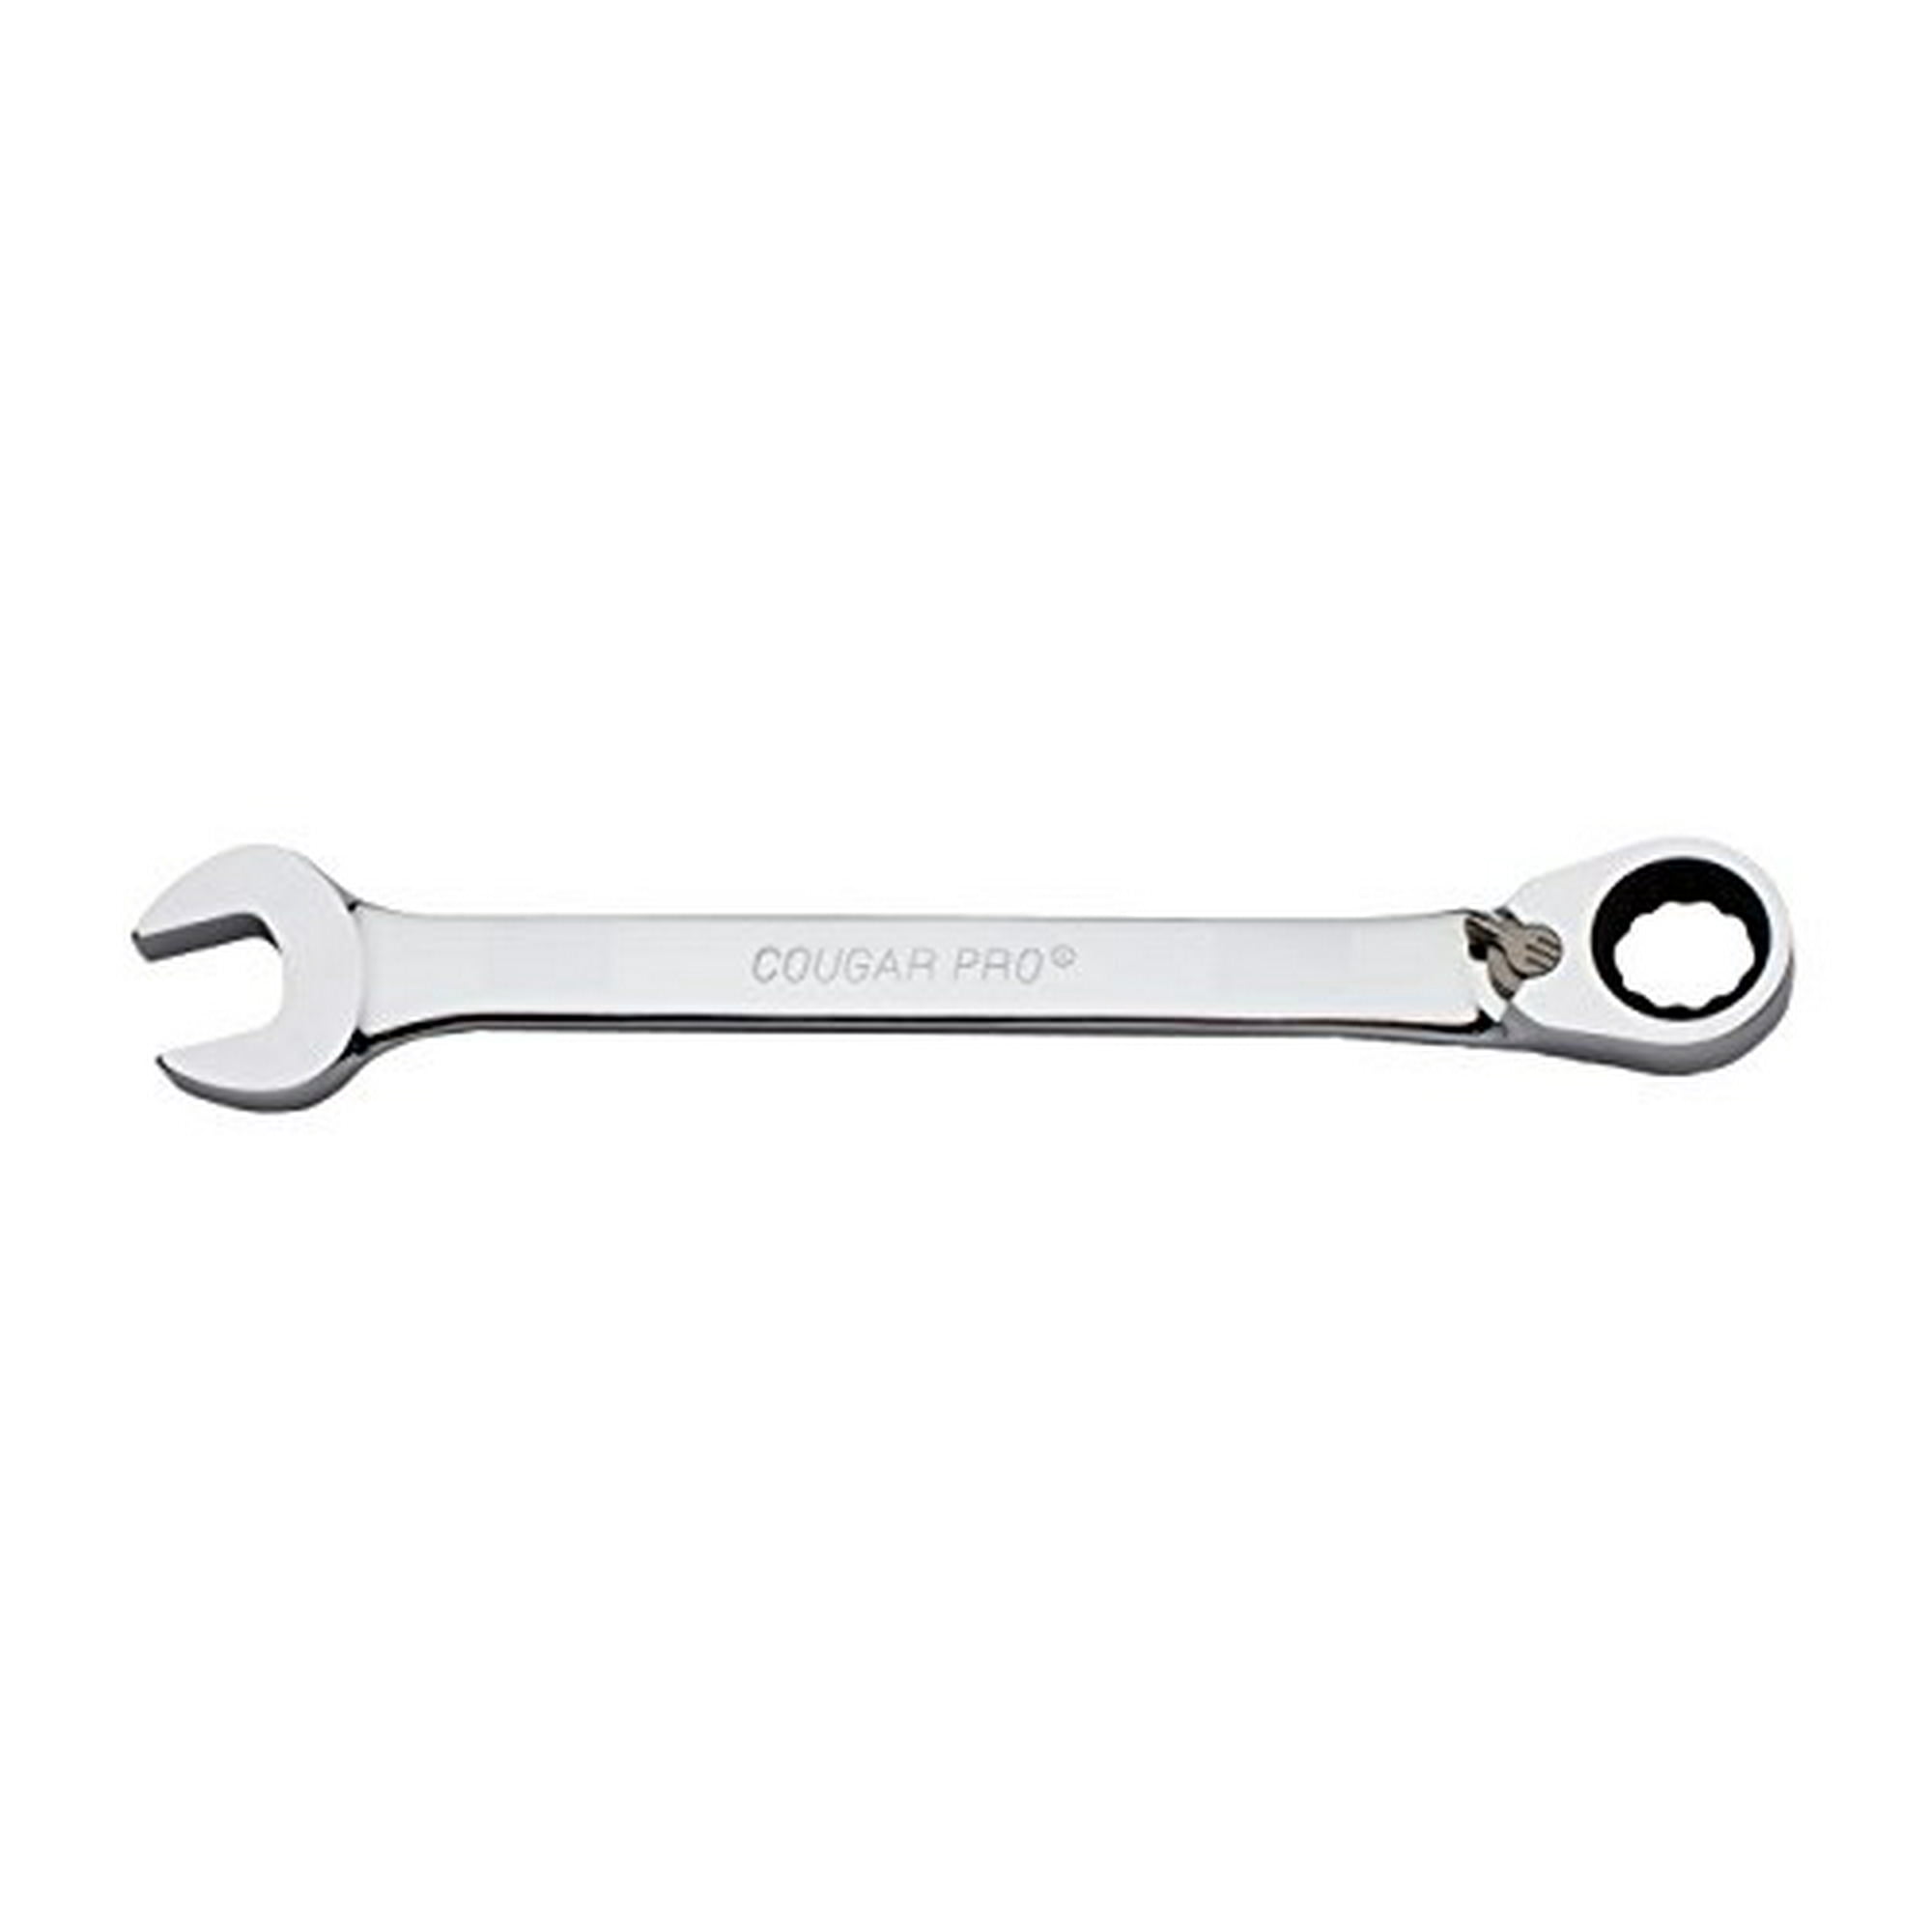 Full Polish Chrome Cougar Pro by Wright Tool M1513 13mm Reversible Ratcheting Combination Wrench 